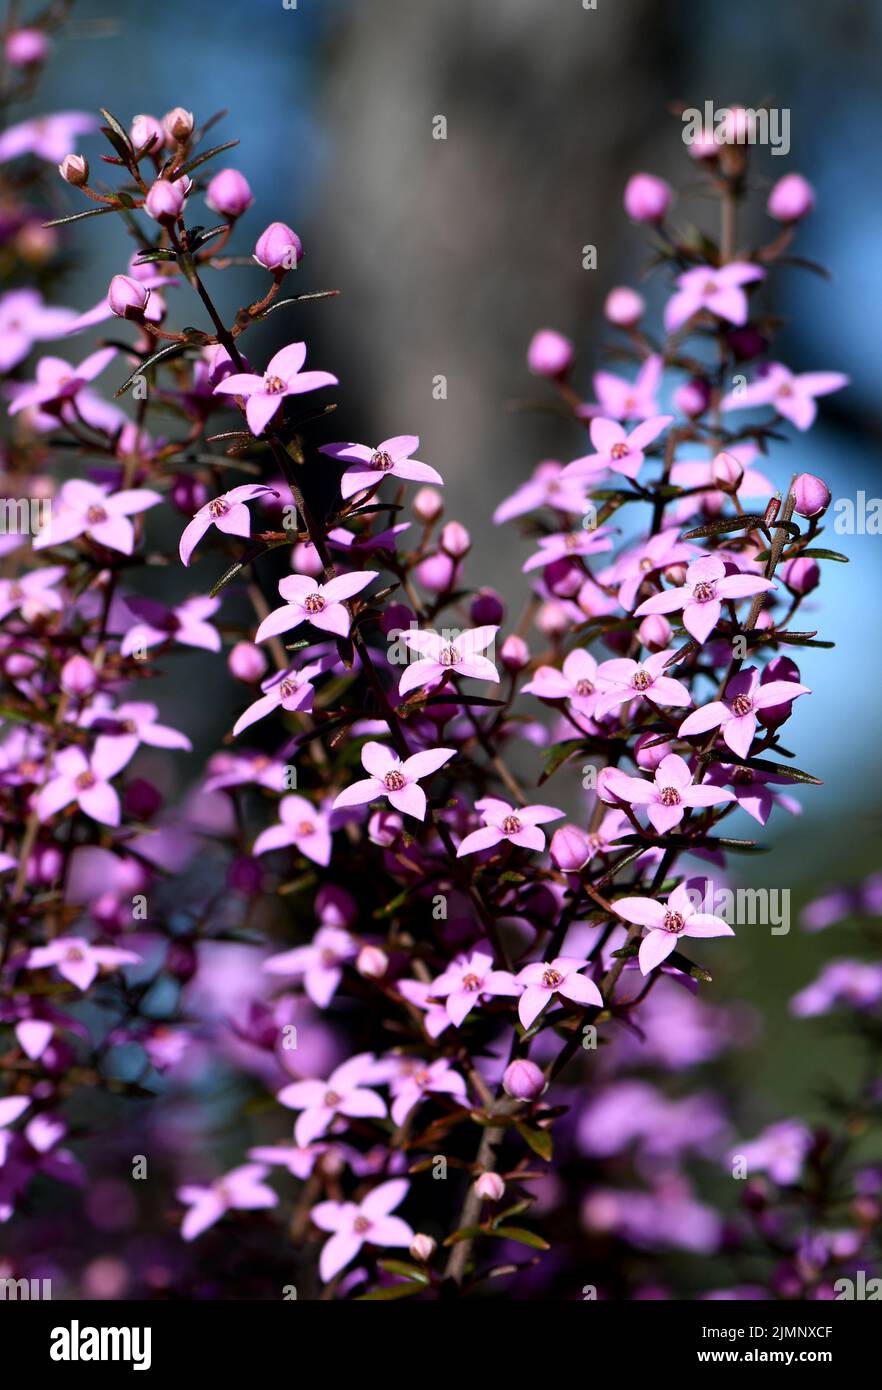 Beautiful pink flowers of the Australian native Boronia ledifolia, family Rutaceae, growing in Sydney sclerophyll forest. Winter to spring flowering. Stock Photo